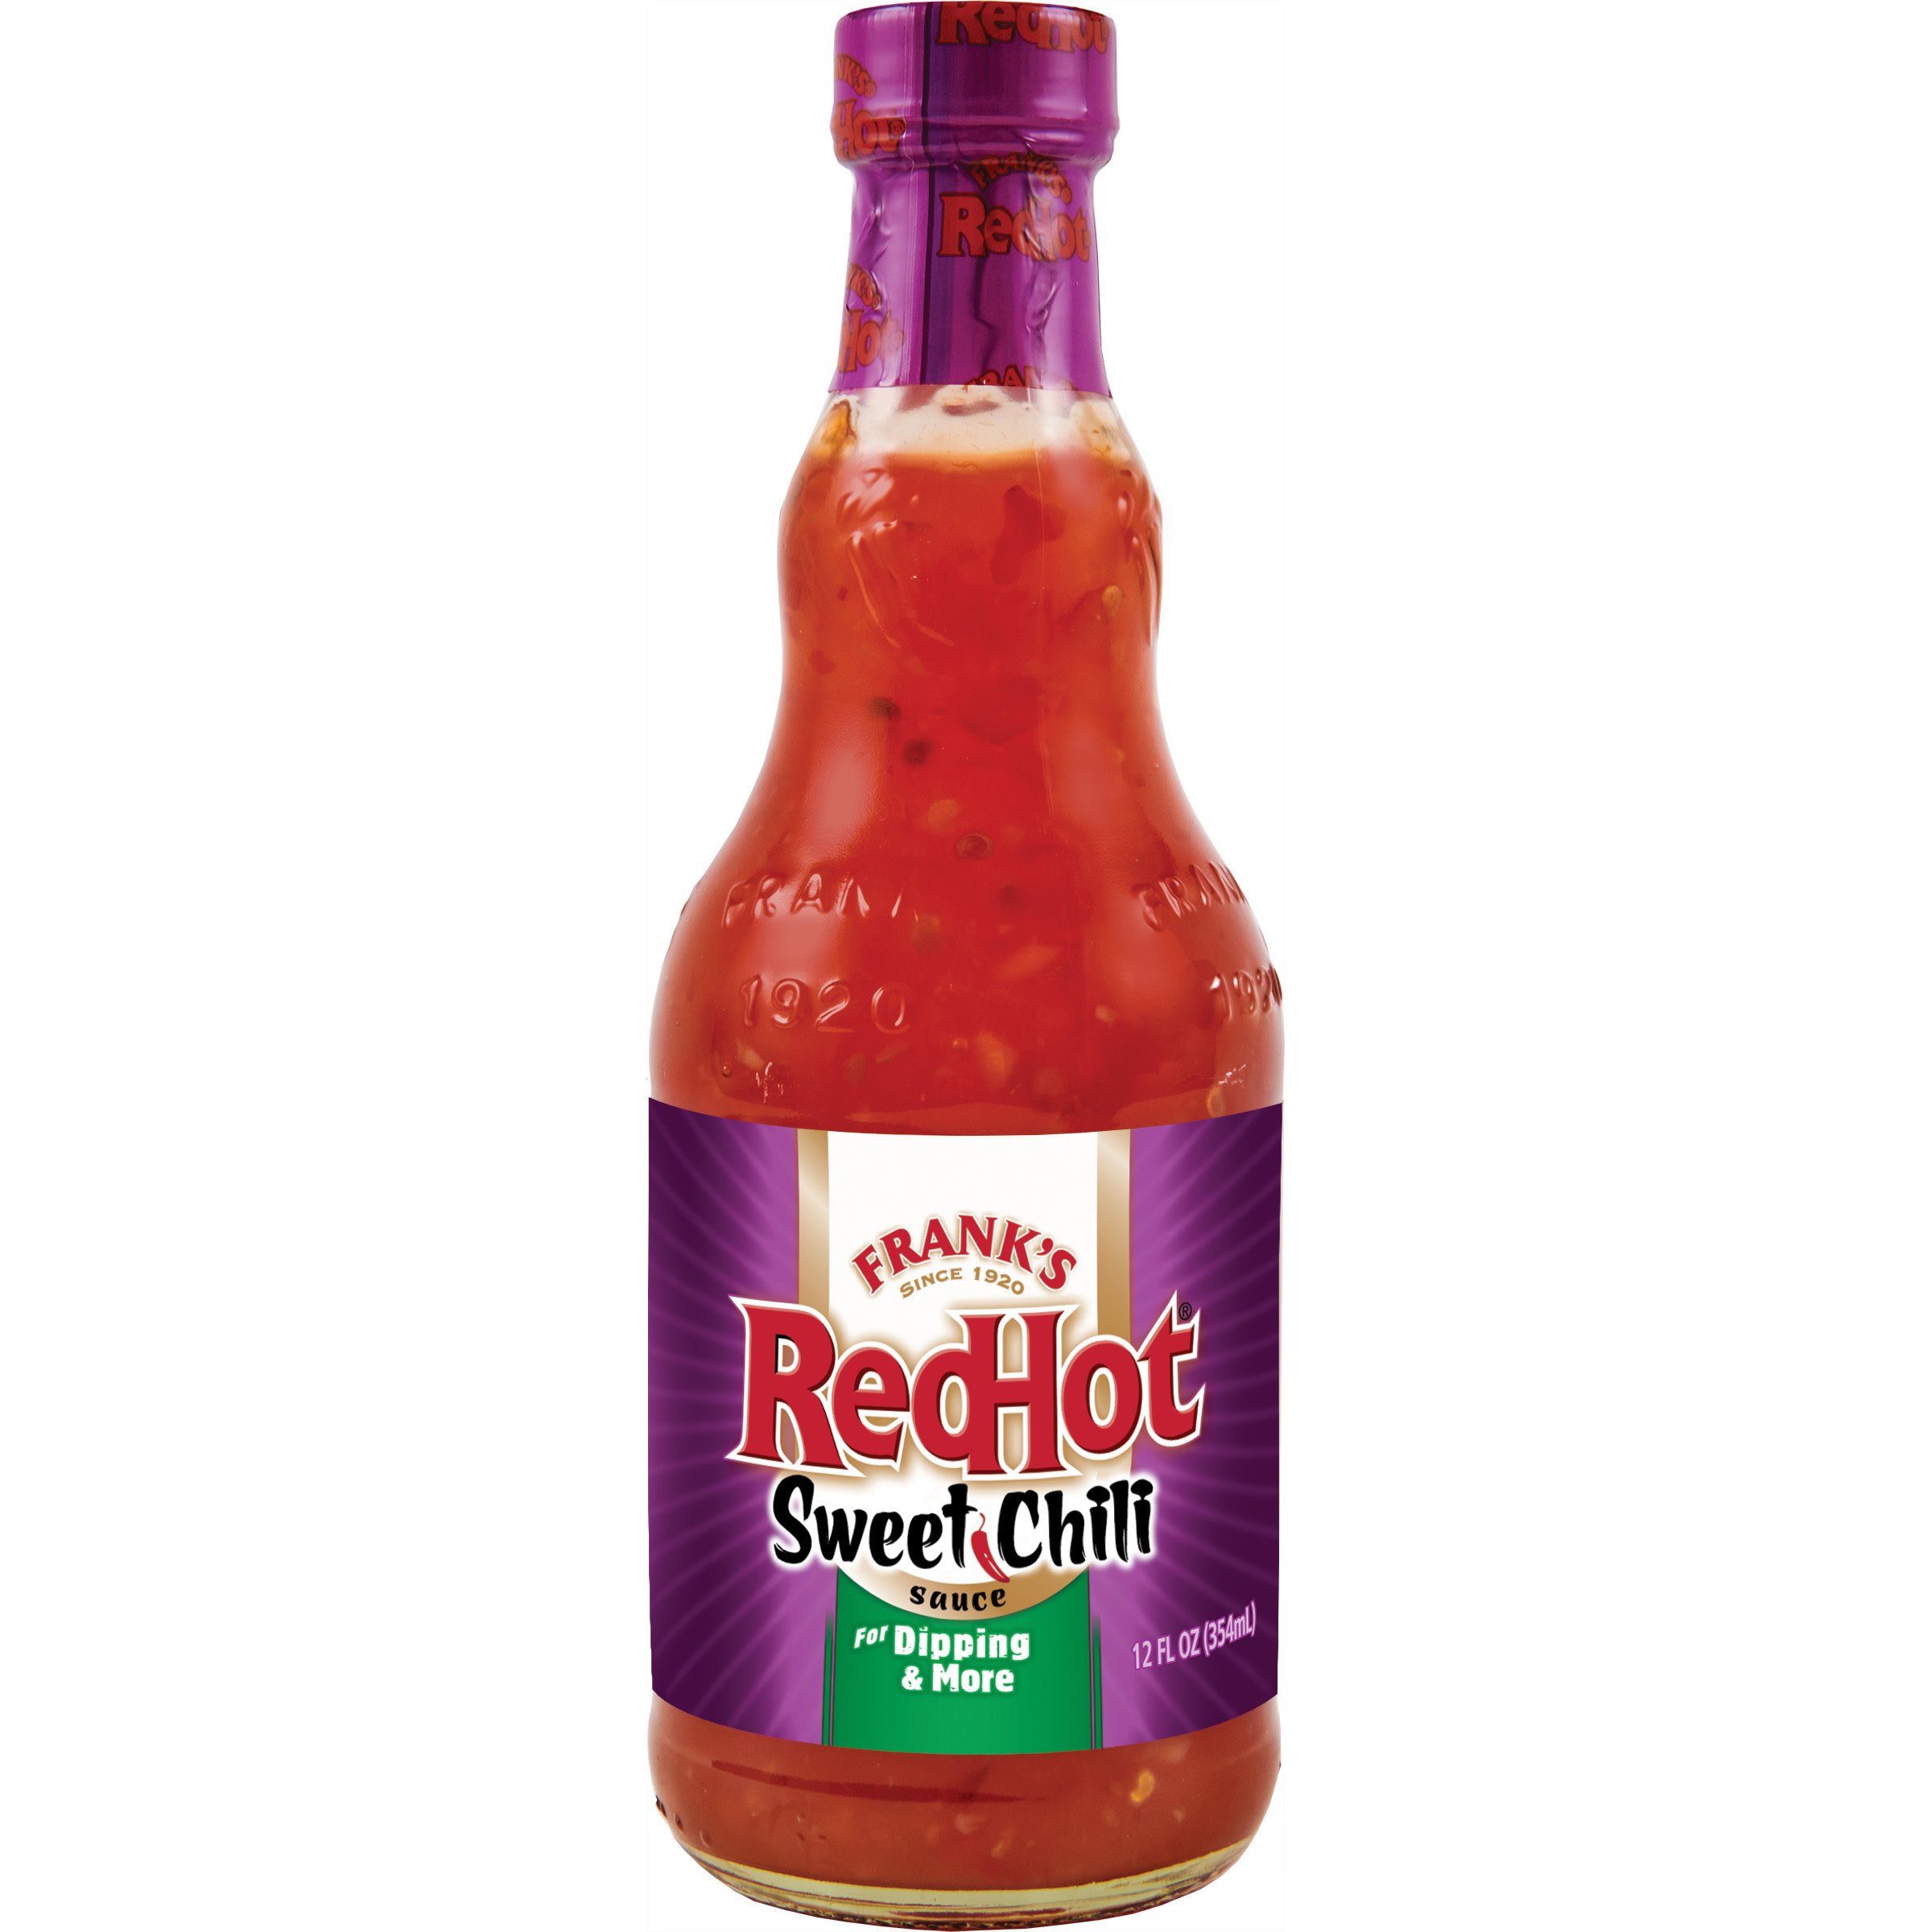 Frank S Red Hot Sweet Chili Sauce Shop Hot Sauce At H E B,Best Emergency Food Kits